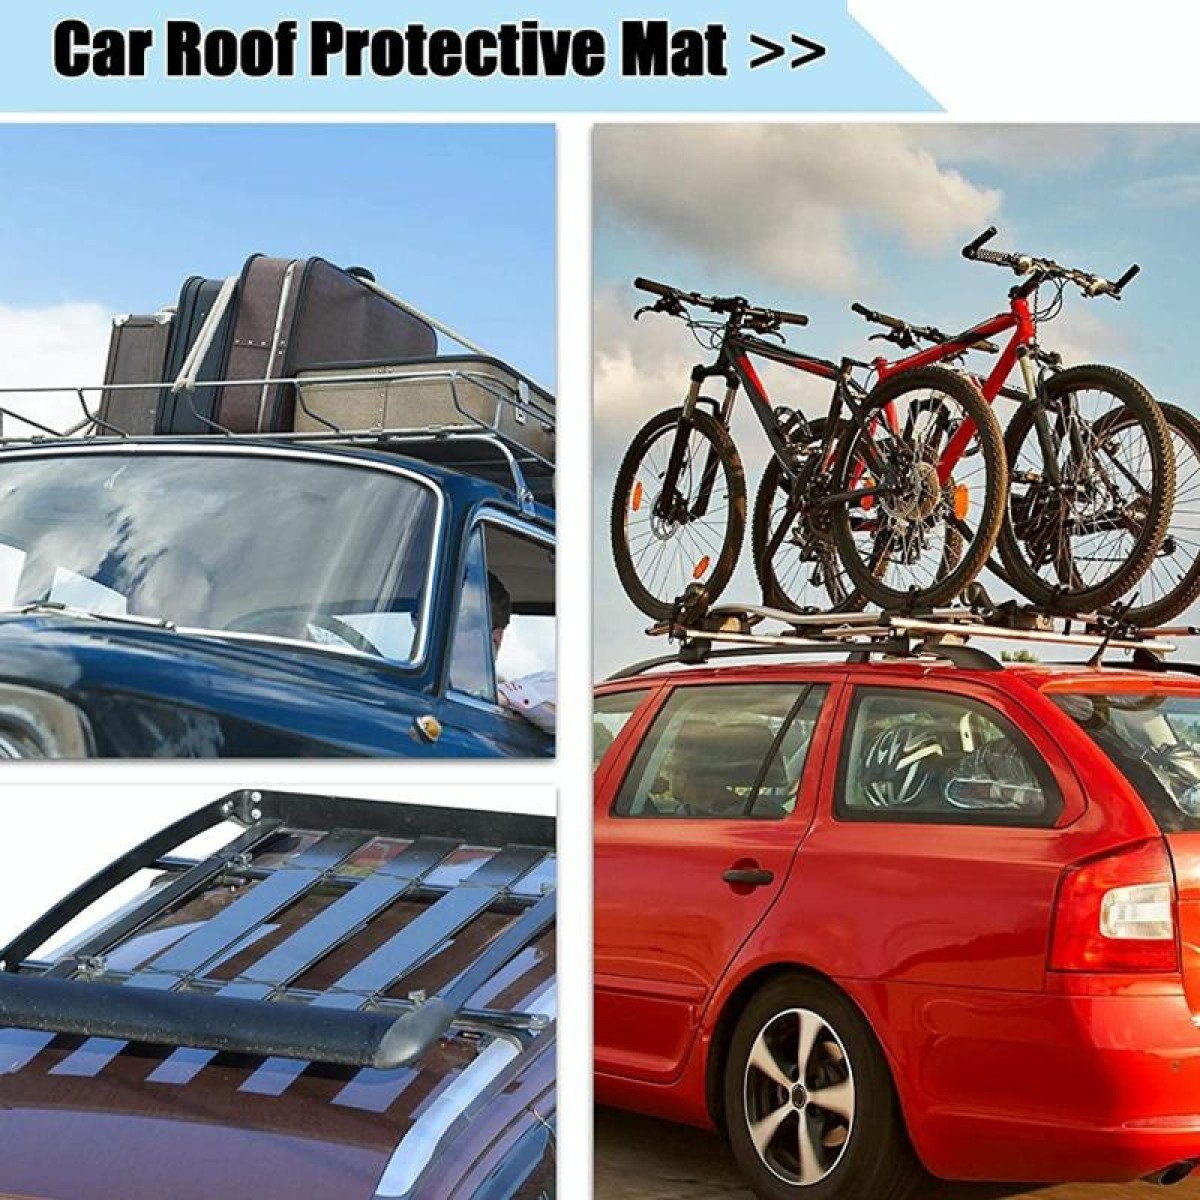 600D Oxford Cloth Car Roof Waterproof Luggage Storage Bag, Style:100x90cm Non-slip Mat